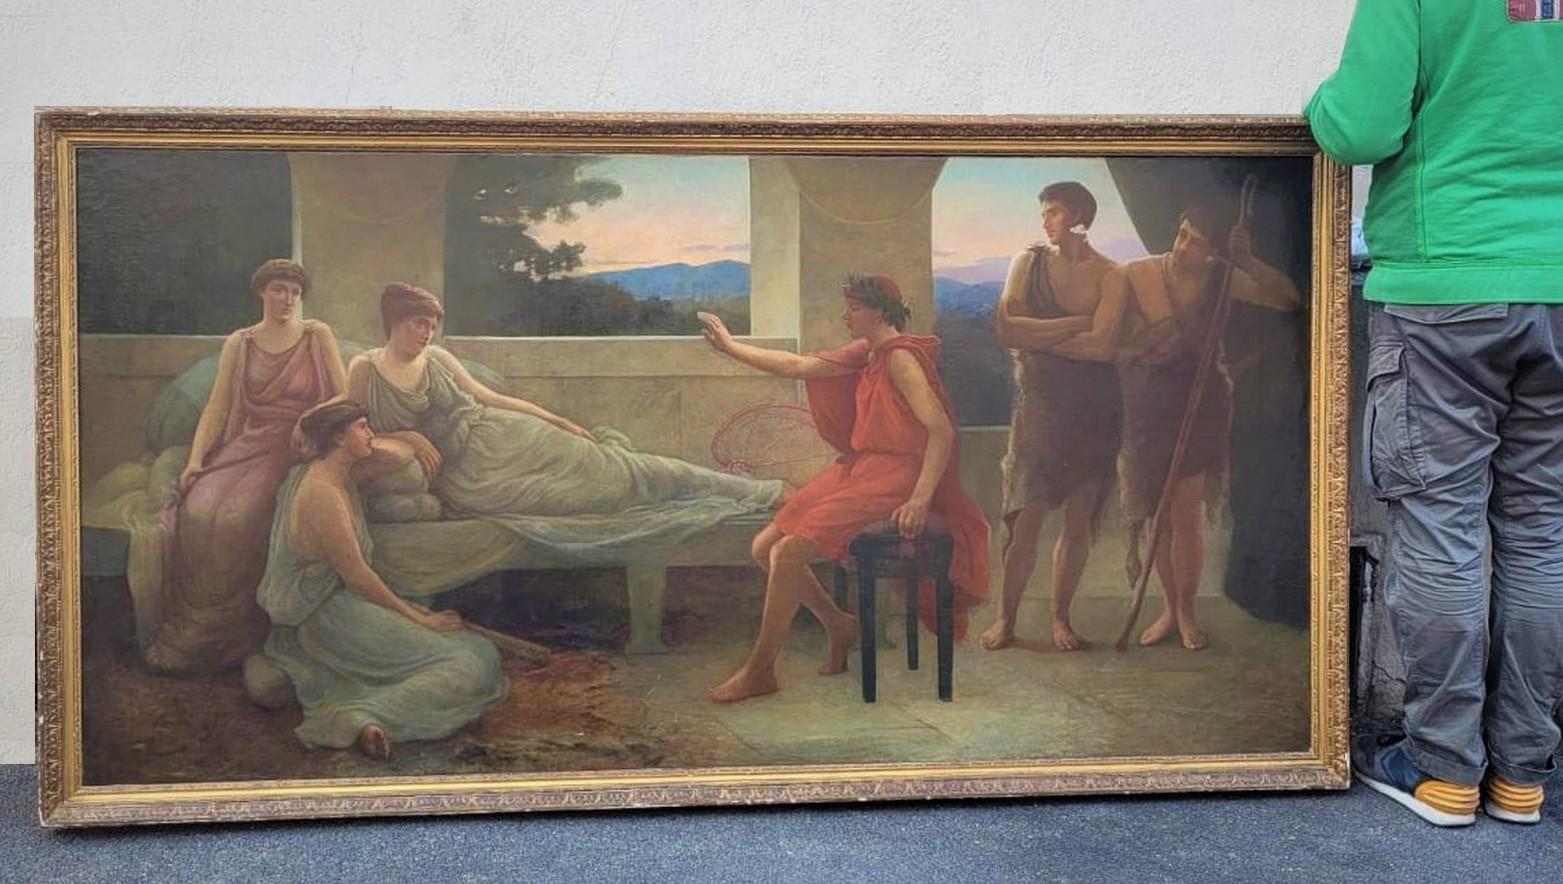 Very large oil on canvas representing a young man crowned with laurels, seated in front of muses and shepherds In the background, a very beautiful landscape

Very good condition, 1 hole and some scratches

Original canvas, with original stretcher,